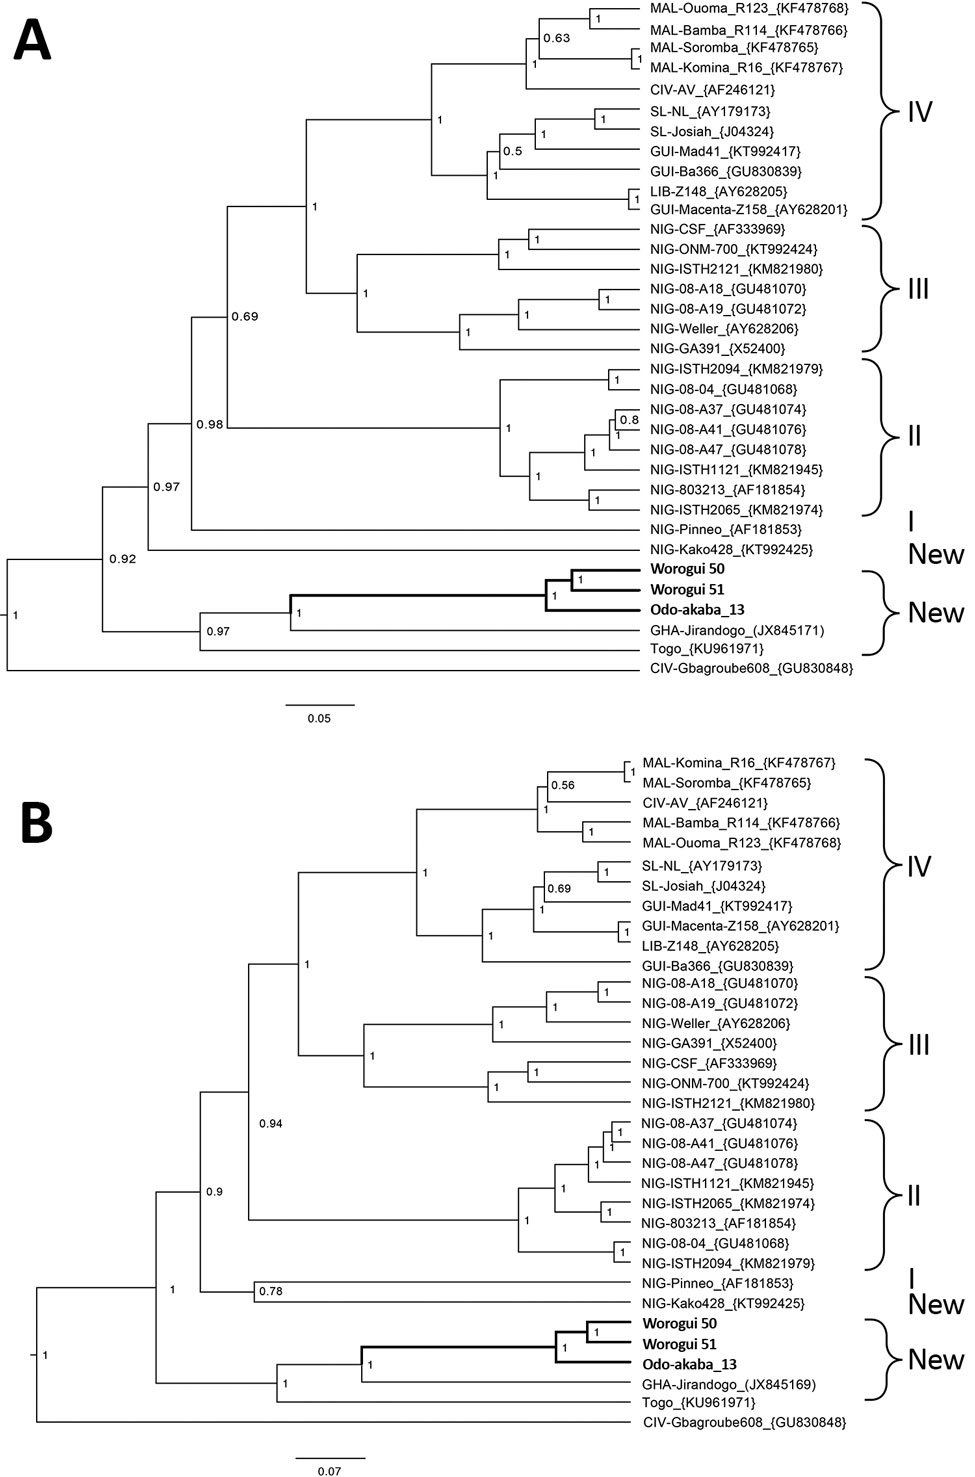 Bayesian phylogenetic analyses based on nucleotide sequences of the partial glycoprotein and nucleoprotein genes of Lassa virus (LASV), showing the placement of the new sequences (in boldface) isolated from Mus baoulei pygmy mice, in comparison with other sequences representing the members of LASV lineages I–IV. A) Glycoprotein, 1,408 nt; B) nucleoprotein, 1,654 nt. The trees are rooted by Gbagroube, a LASV-like virus isolated from Mus setulosus mice in Côte d’Ivoire. Statistical support of grou